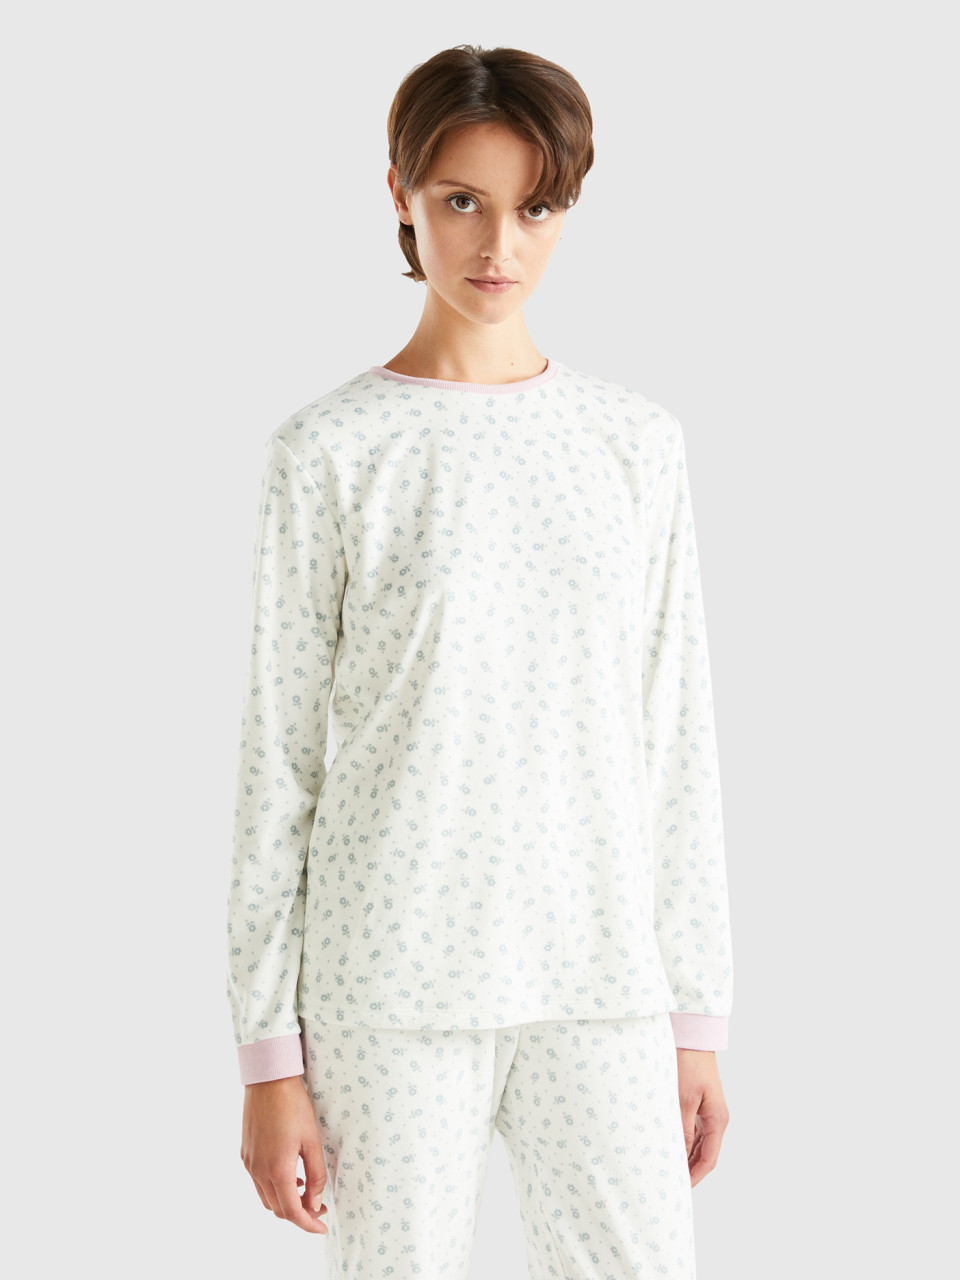 Benetton, Top With Floral Print, White, Women